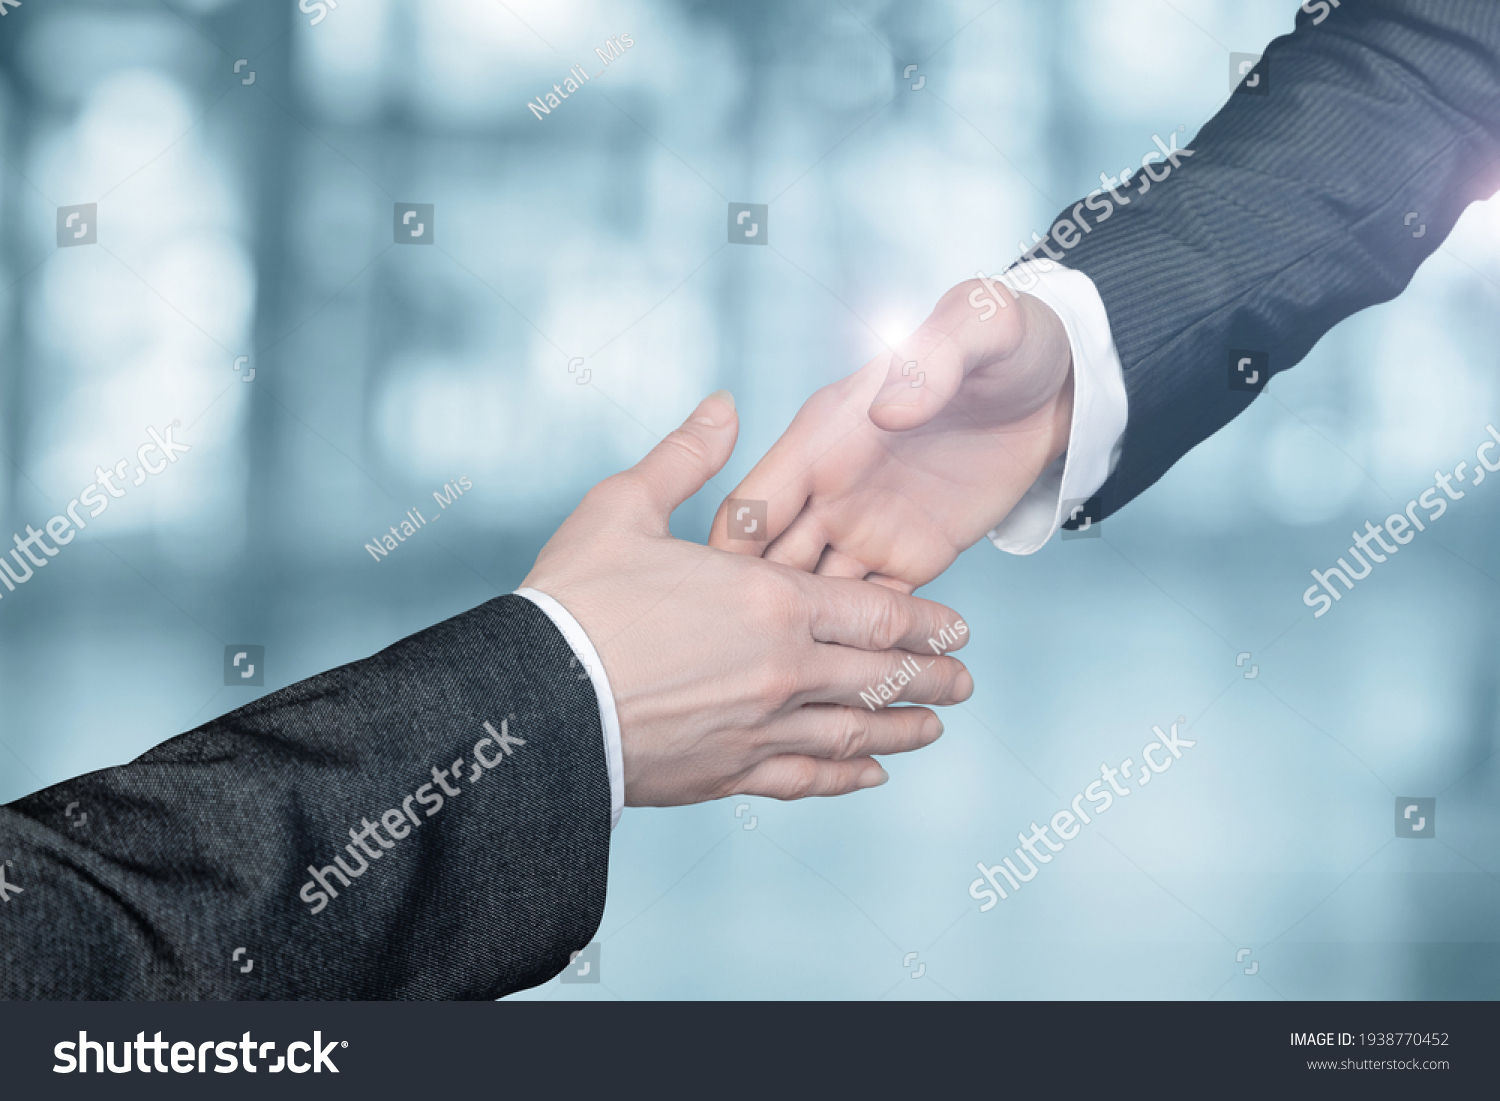 Businessmen reach out to each other to shake hands on a blurred background. #1938770452